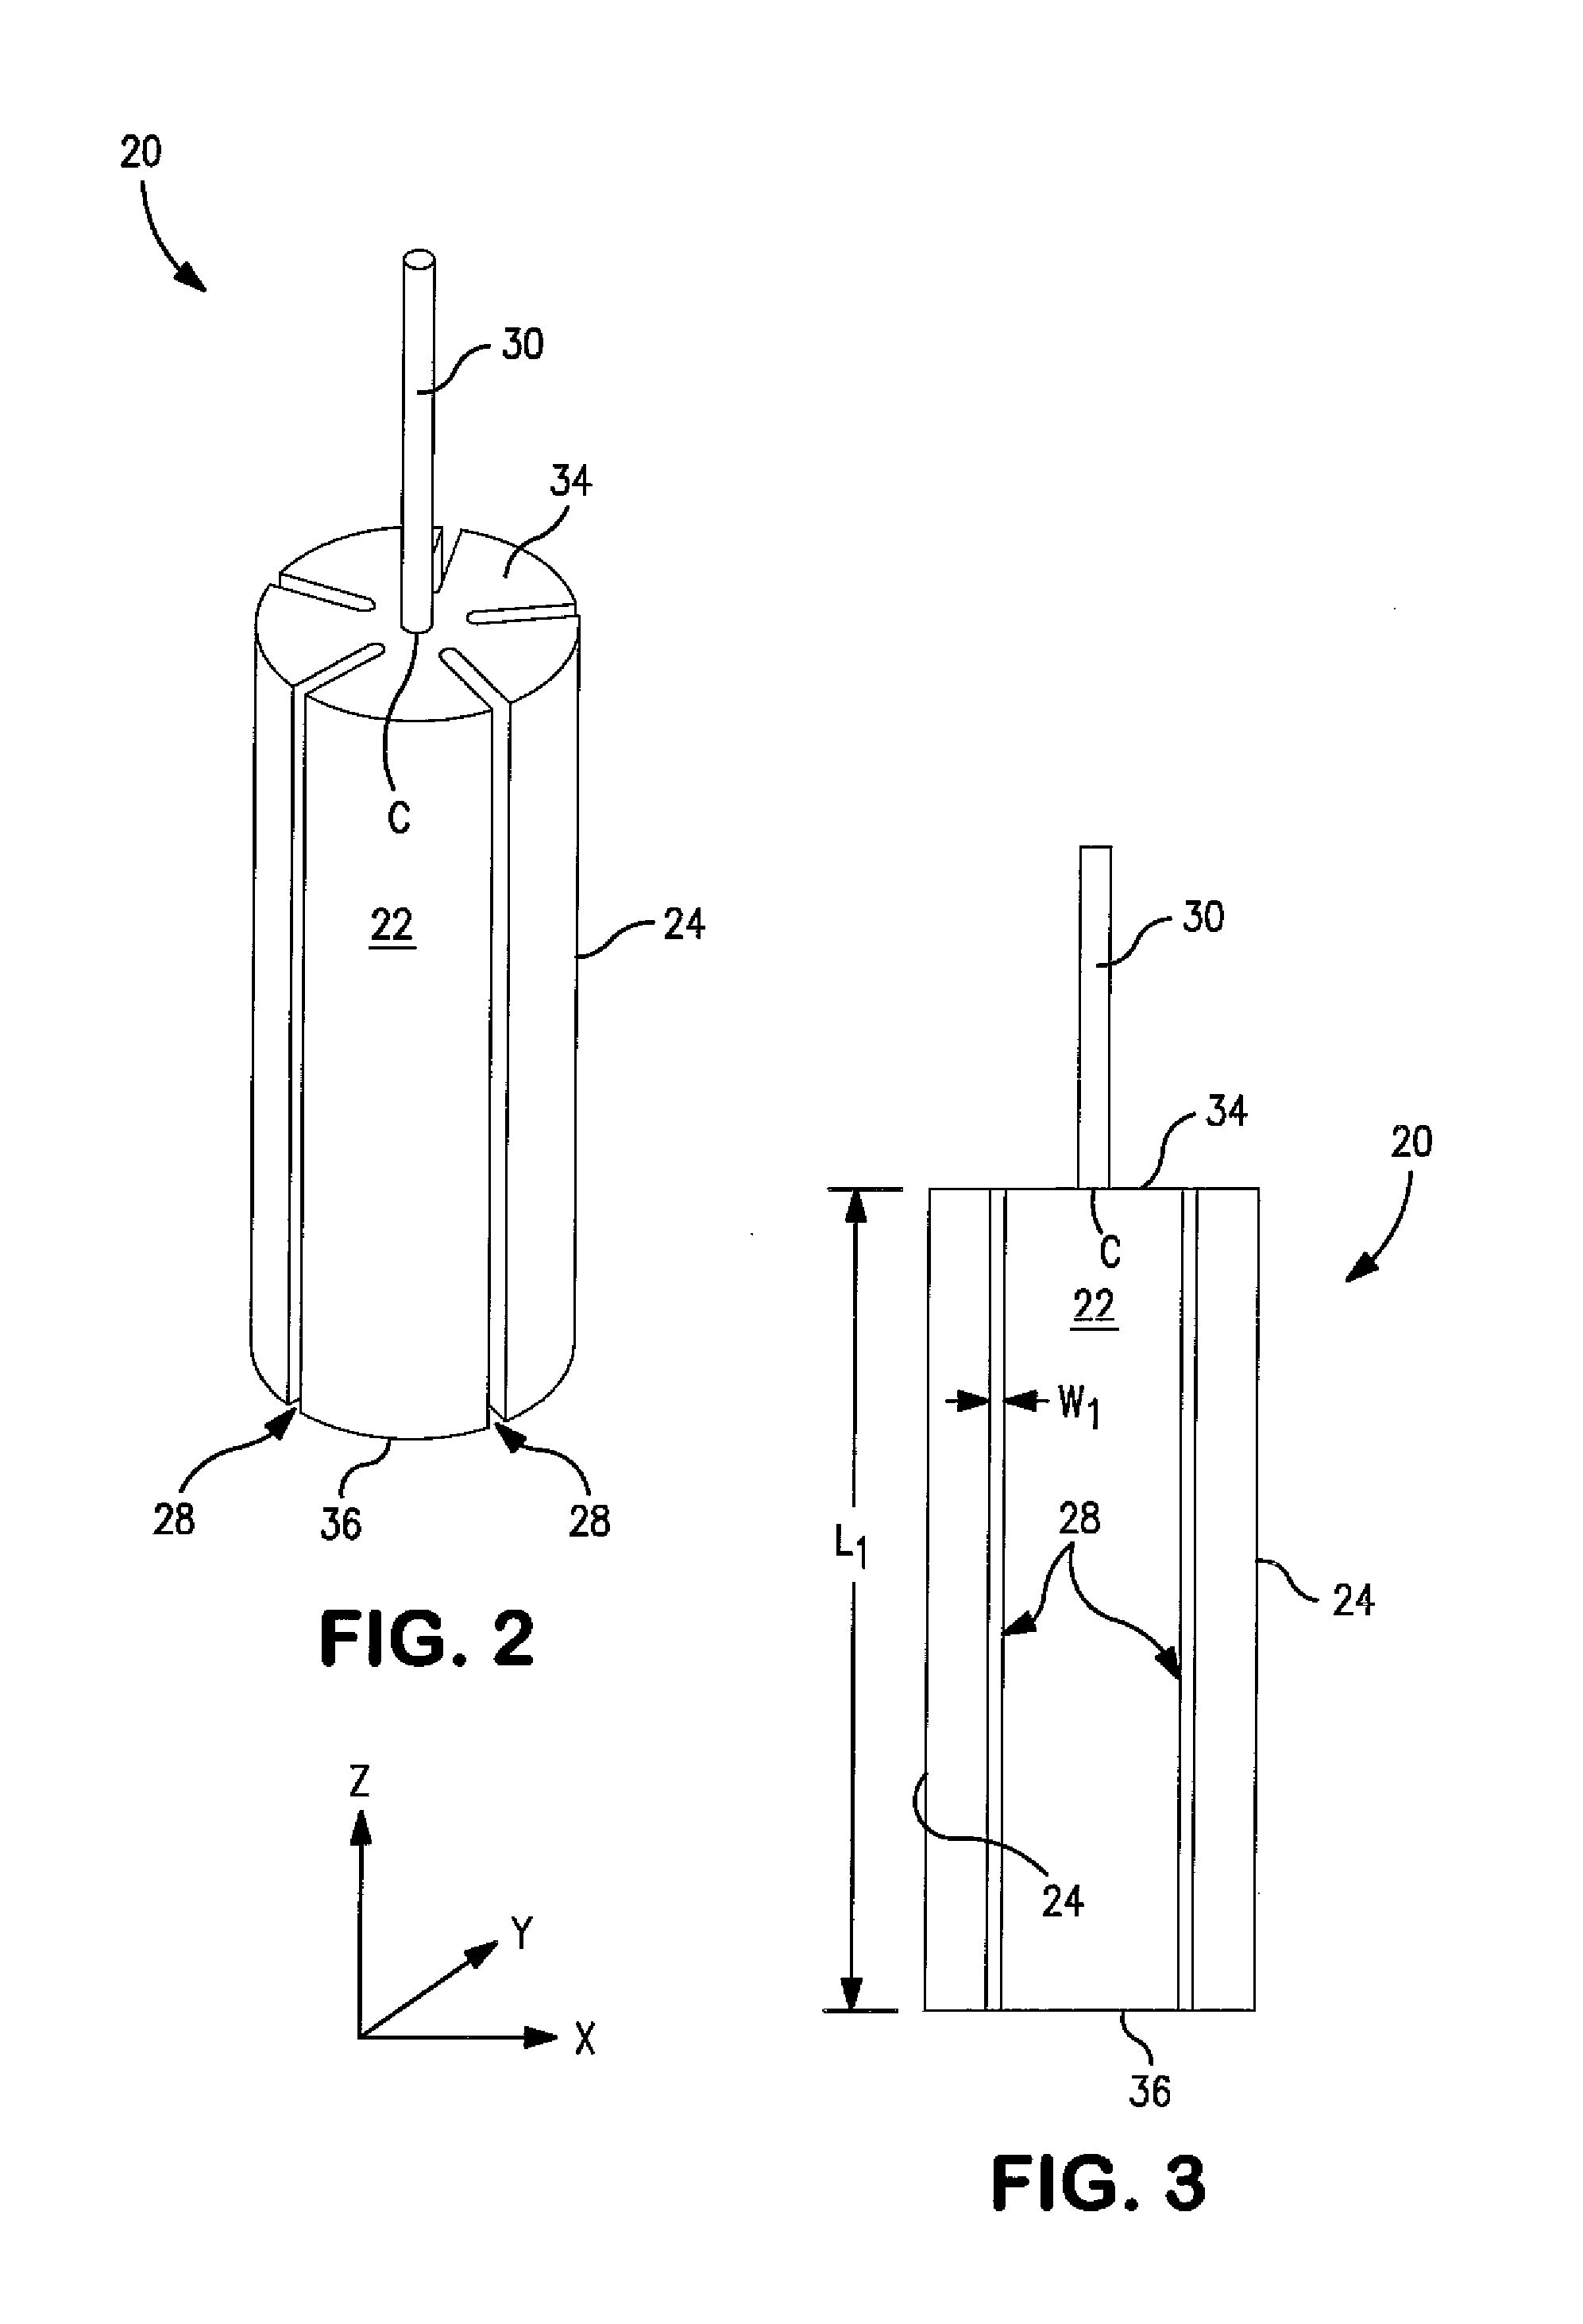 Wet Capacitor Cathode Containing an Alkyl-Substituted Poly(3,4-Ethylenedioxythiophene)